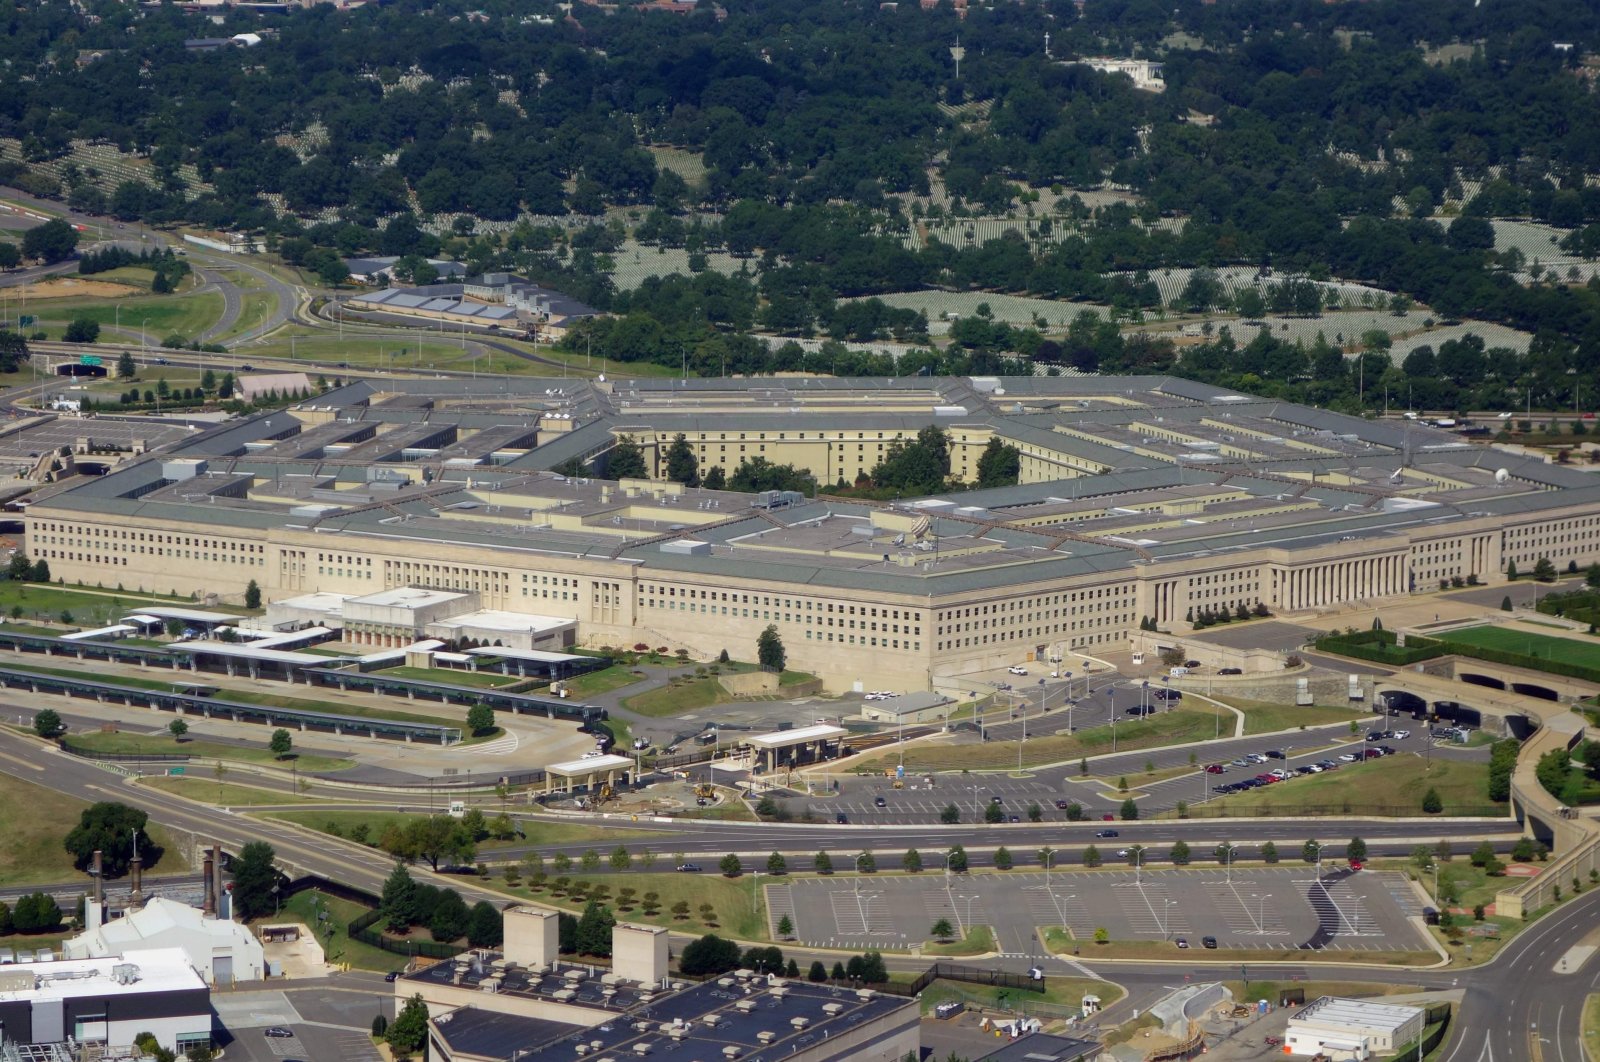 The Pentagon is seen from the air over Washington, D.C., Aug. 25, 2013. (AFP Photo)